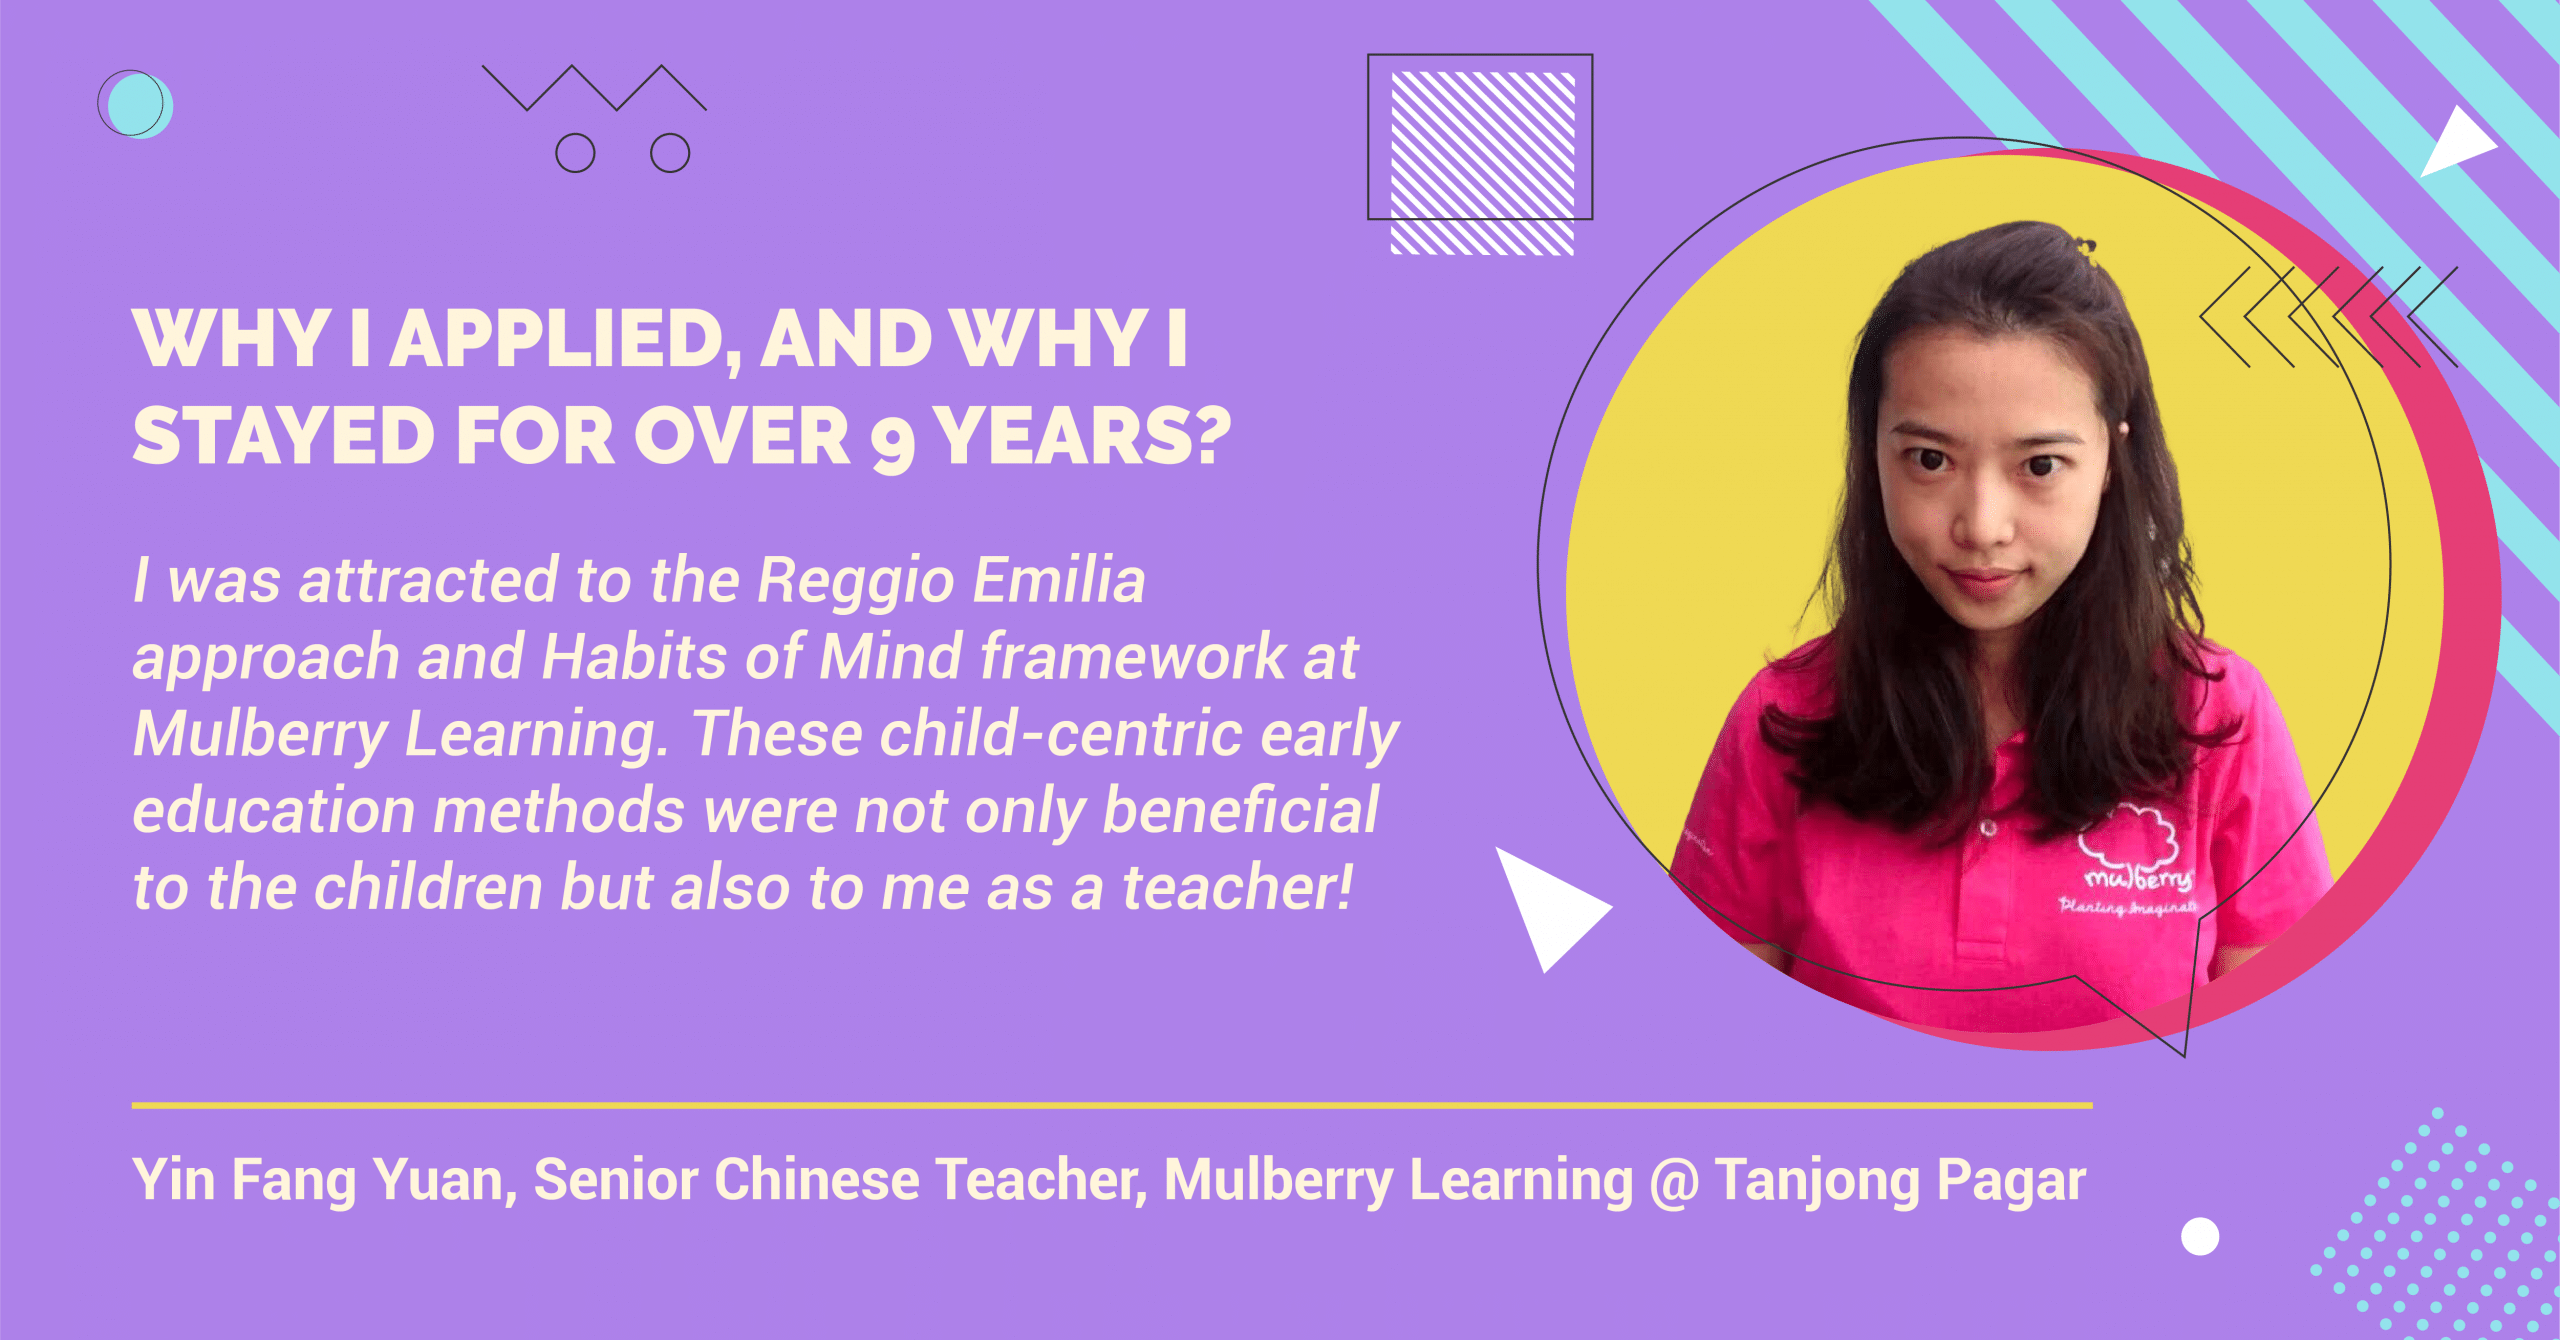 Working at Mulberry Learning, Hear what our preschool teachers say